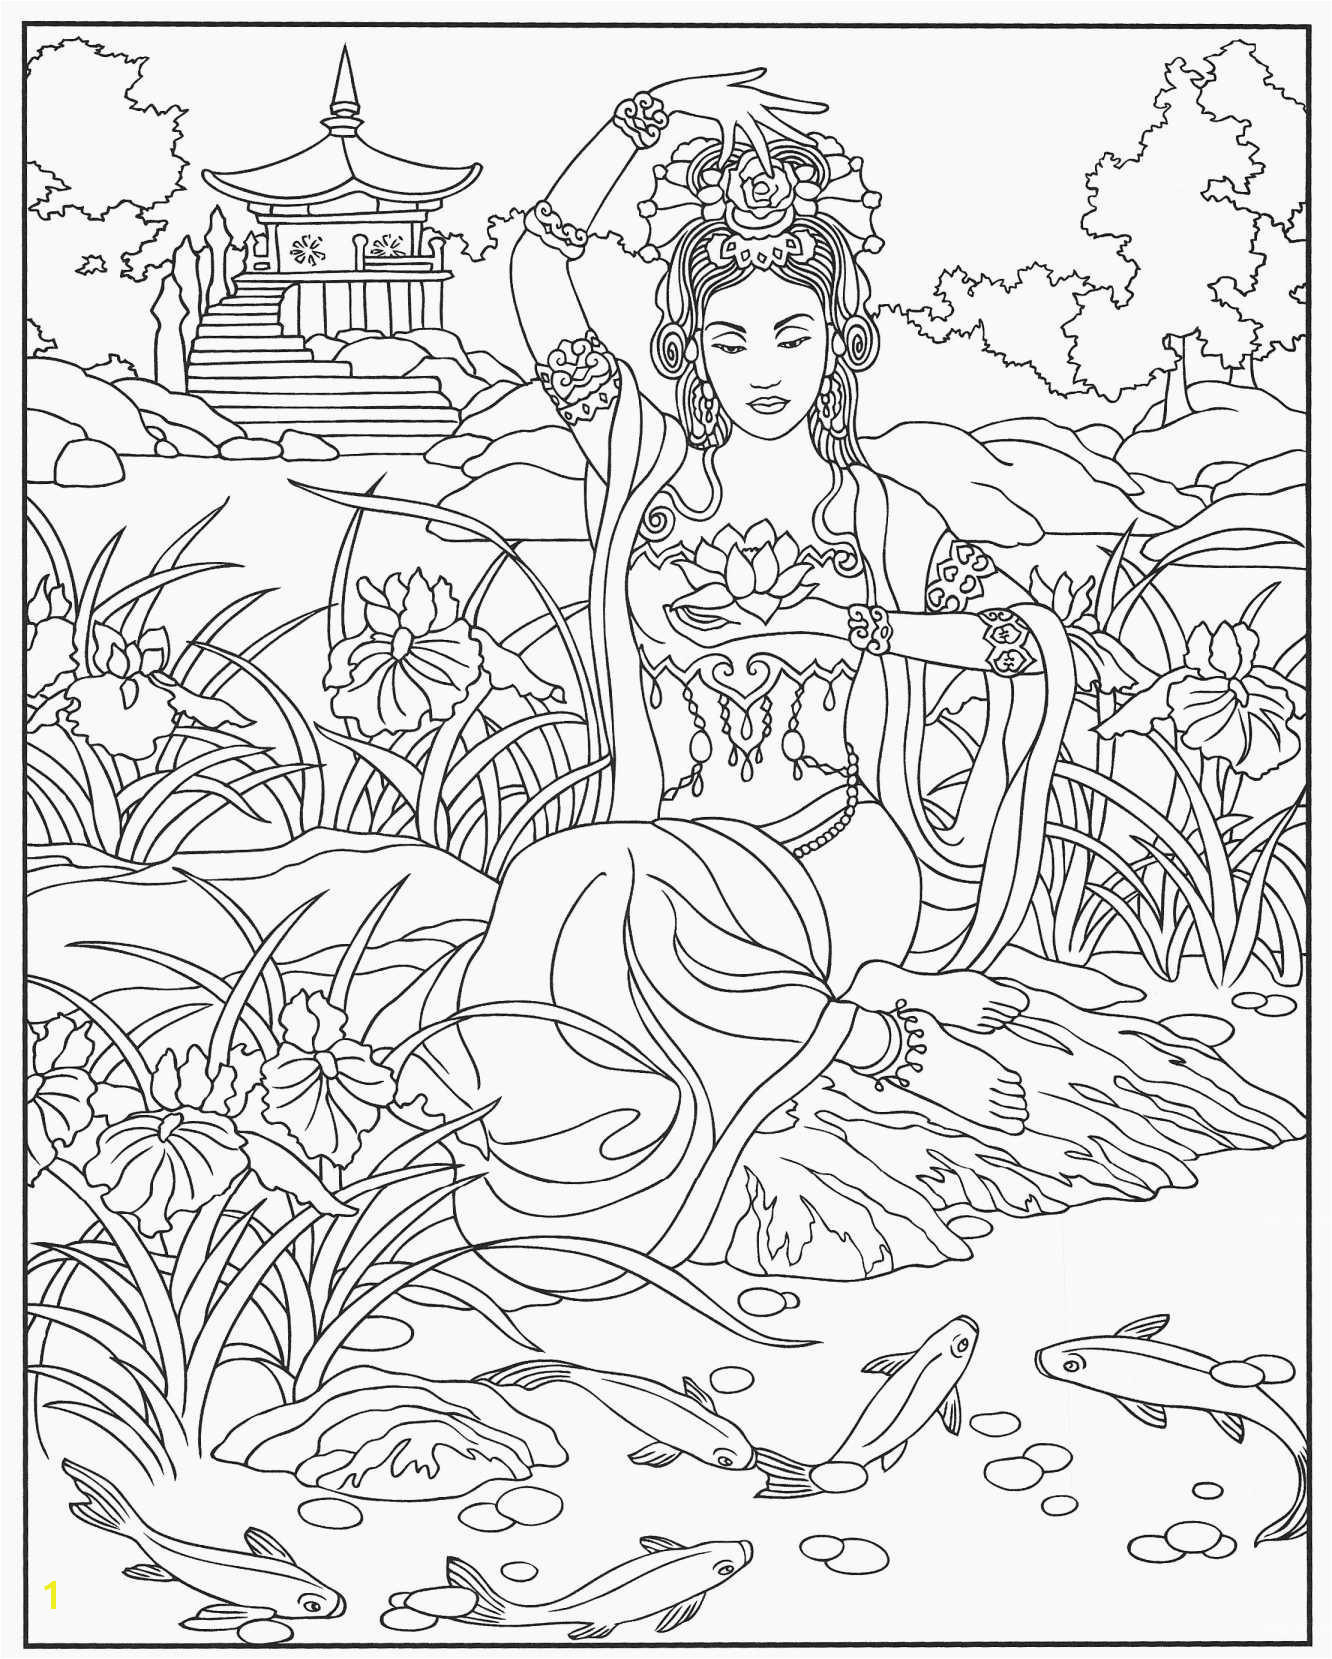 Christmas Angels Coloring Pages Cool Coloring Page Unique Witch Coloring Pages New Crayola Pages 0d